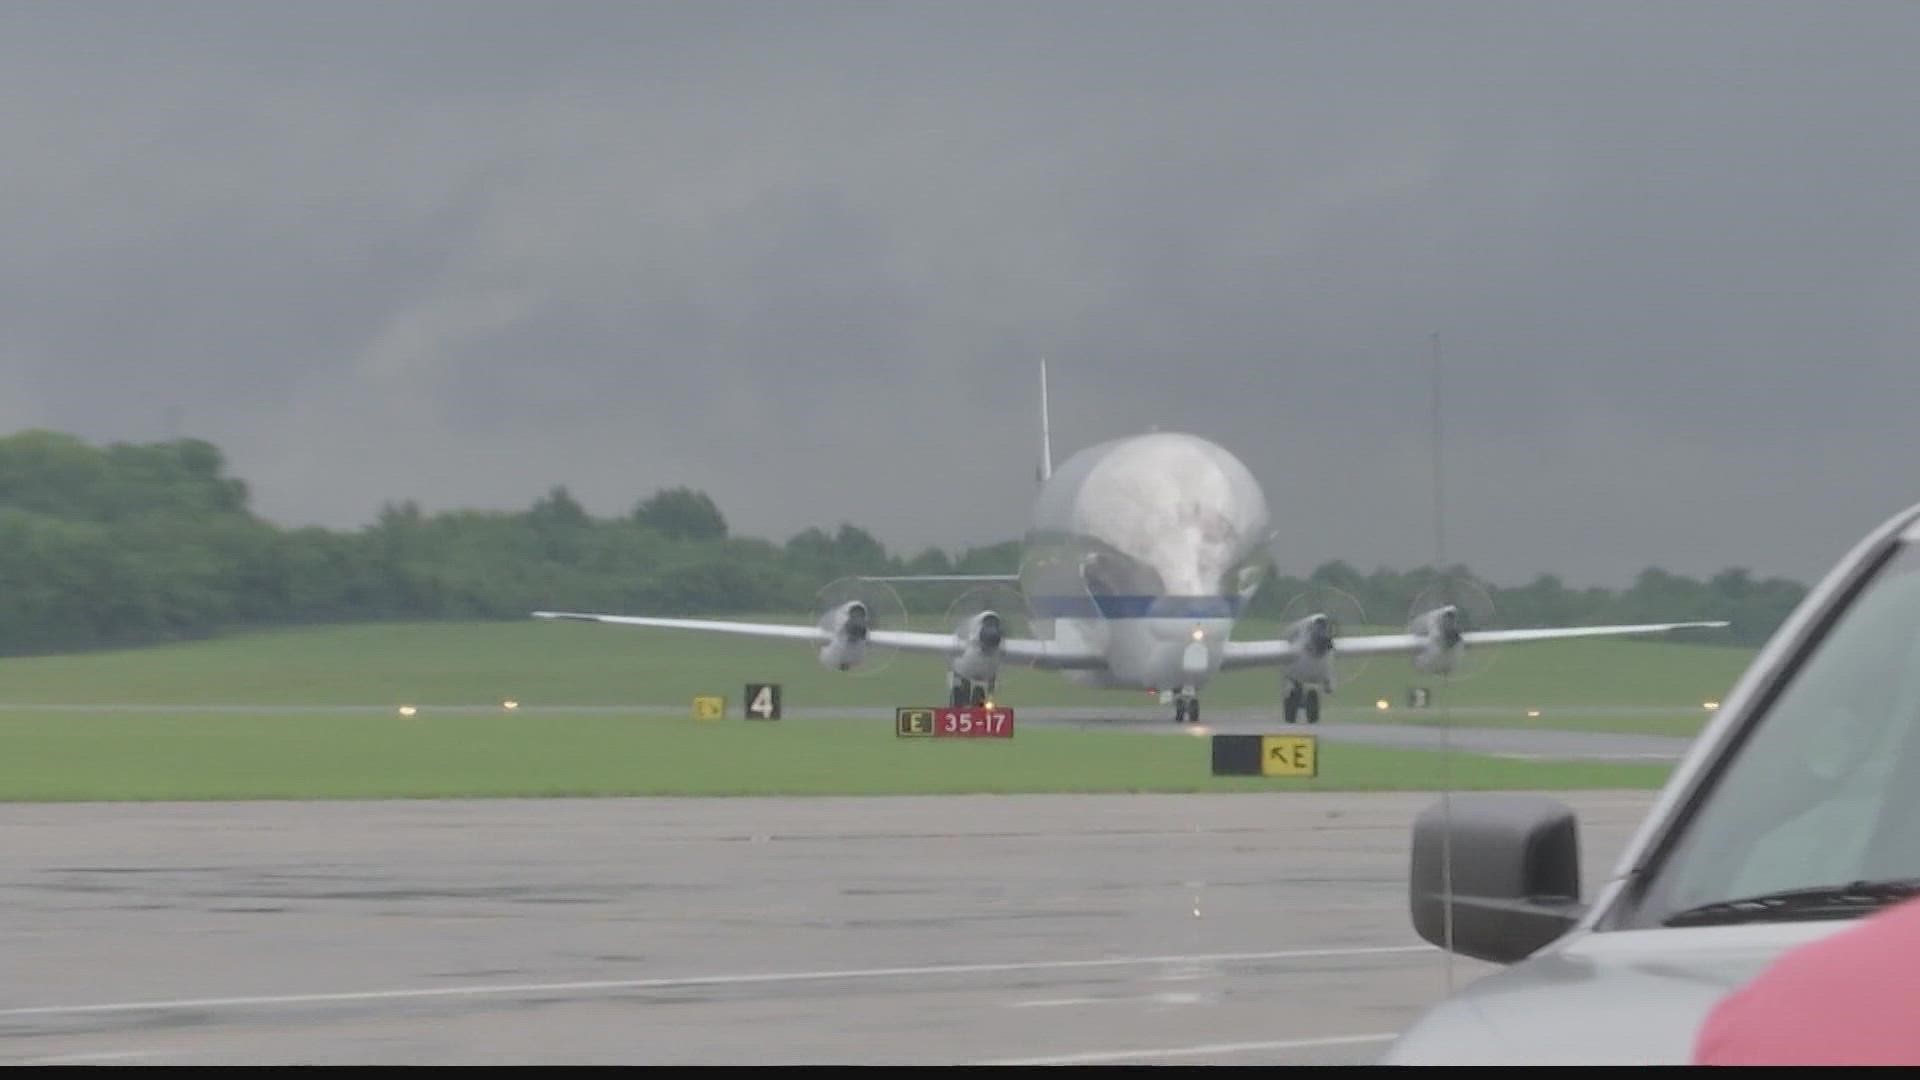 The NASA Super Guppy landed at the Marshall Space Flight Test Center Wednesday